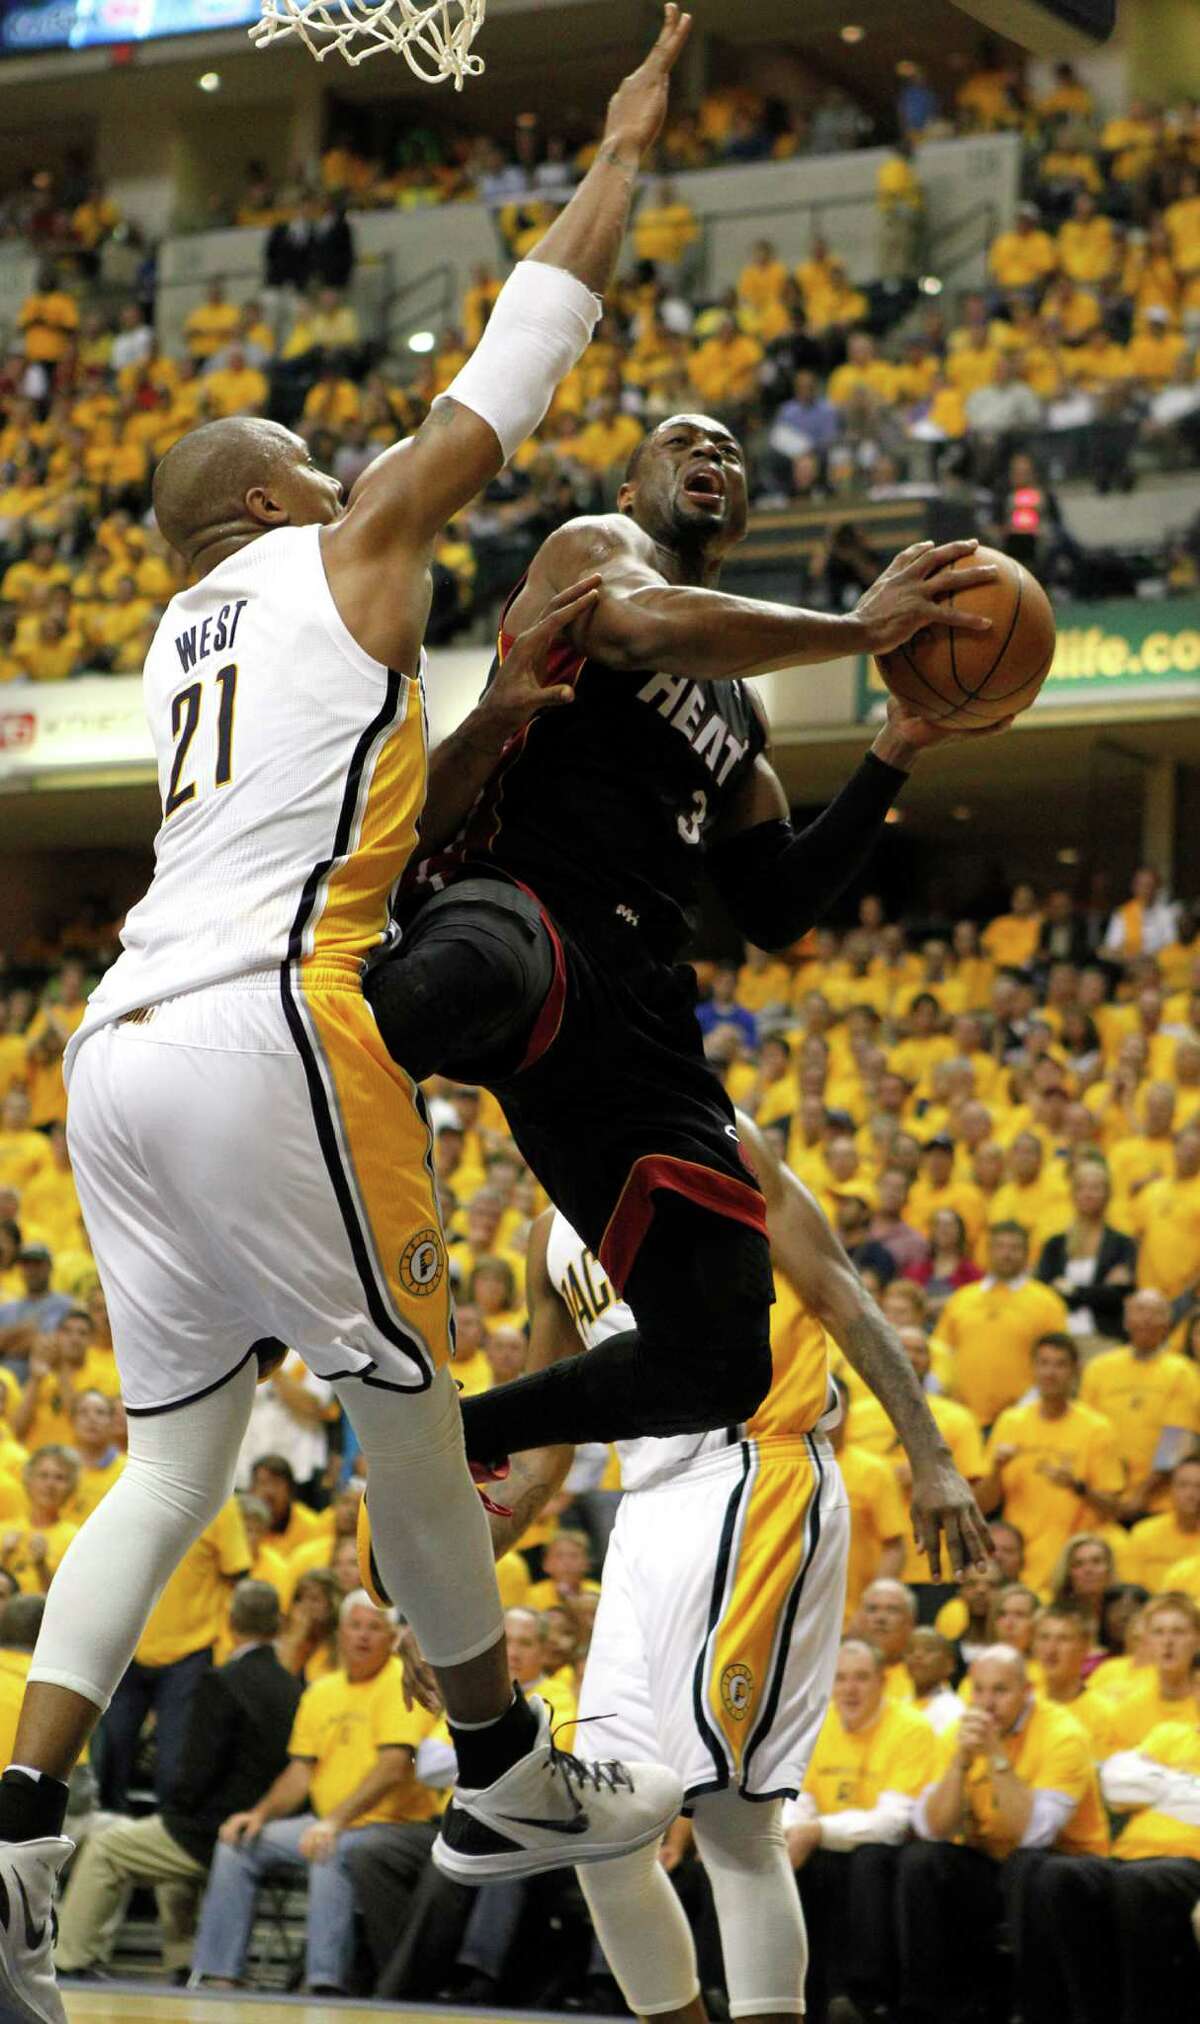 Miami Heat's Dwyane Wade is fouled by Indiana Pacers' David West late in the fourth quarter in the Eastern Conference Semifinals in Round 2, Game 6 at the Bankers Life Field House in Indianapolis, Indiana on May 24, 2012 The Heat won 105-93 to win the series 4-2. (AP Photo/Charles Trainor, Miami Herald)